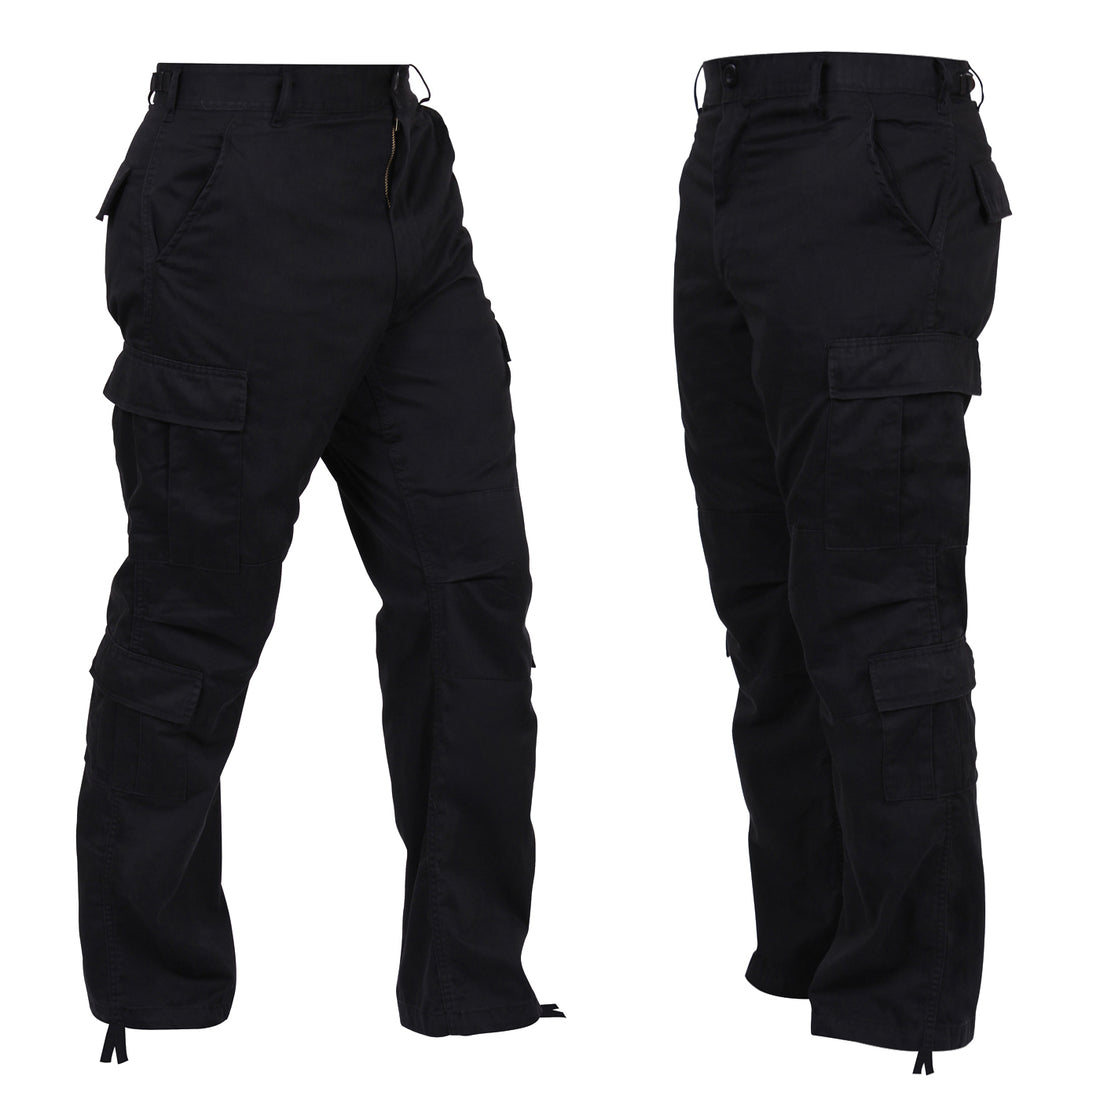 Rothco's Vintage Paratrooper Fatigue Pants in Black